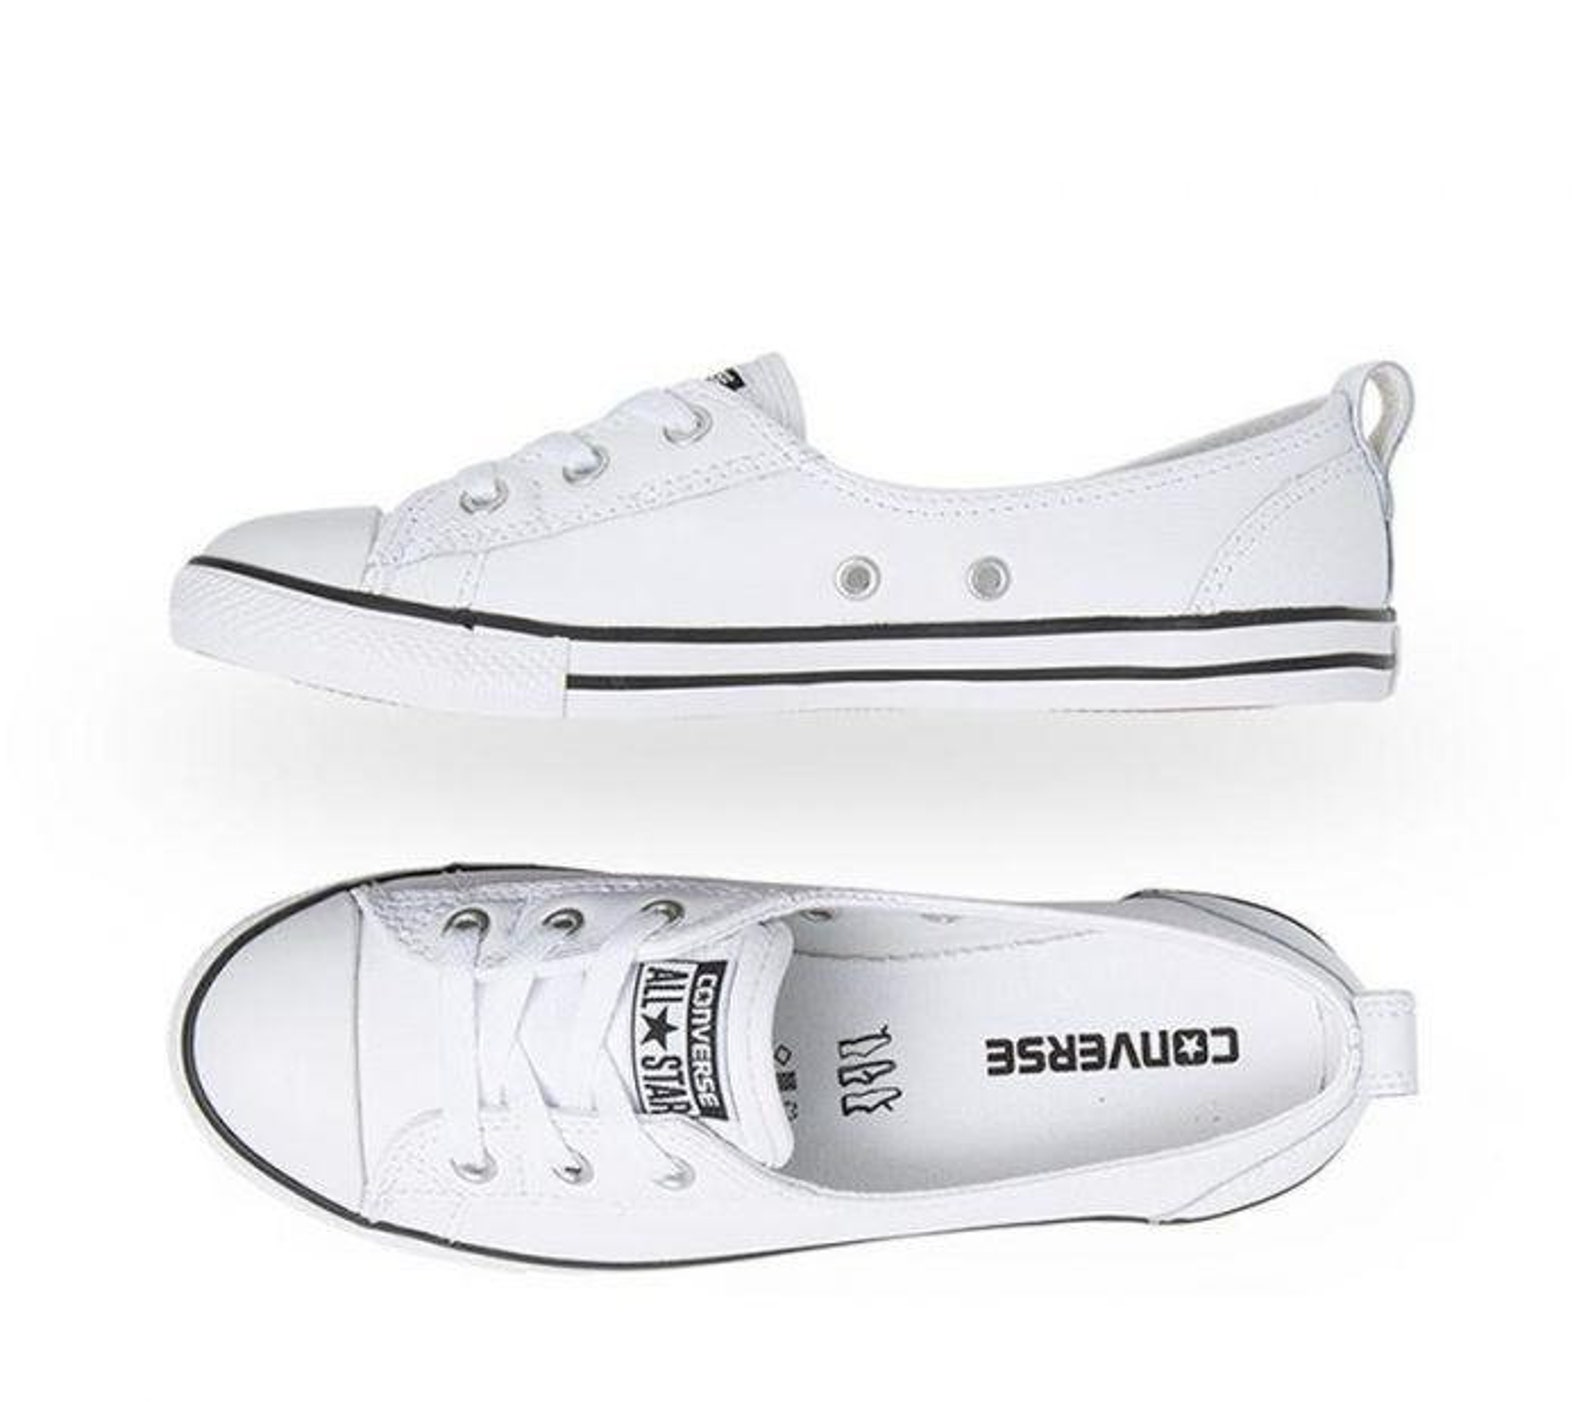 converse ballet flats white leather